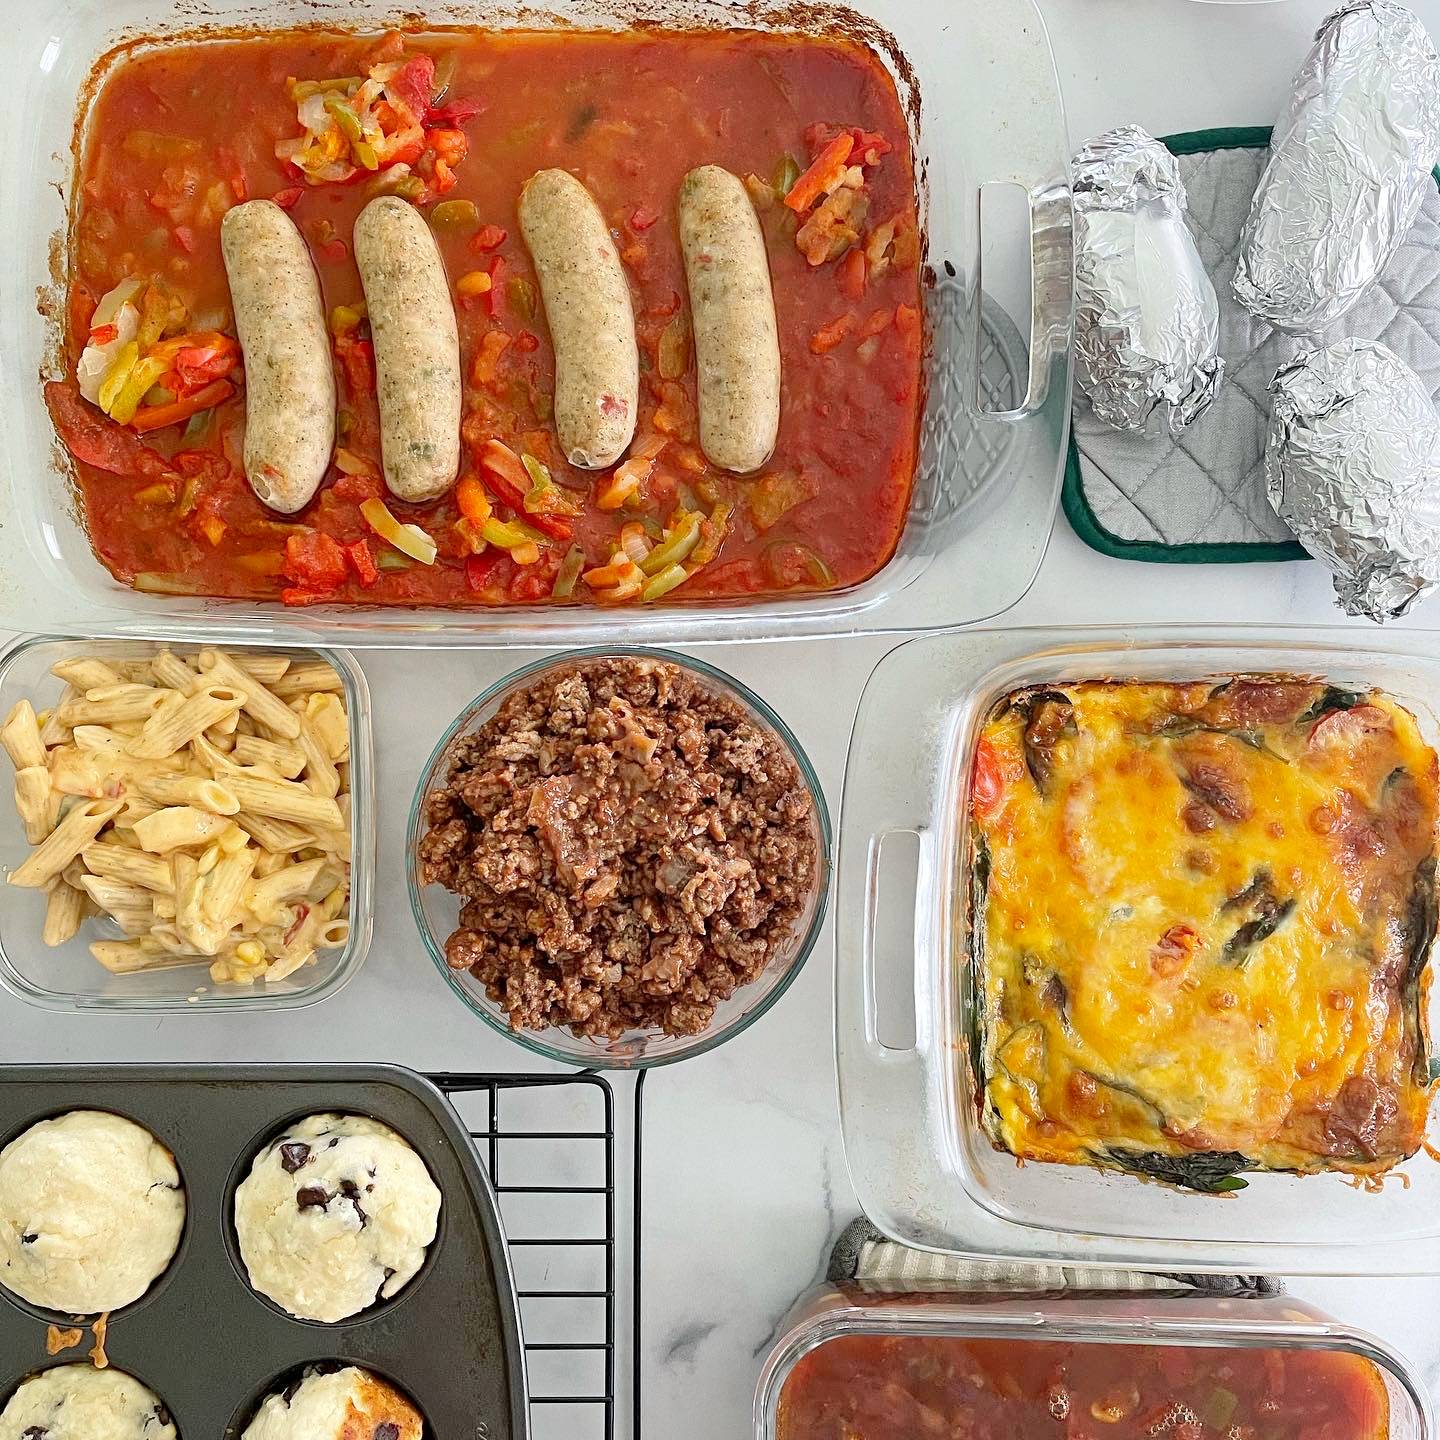 marble surface with variety of food dishes (sausages on top of red sauce with veggies in rectangle dish on top left, baked potatoes in aluminum foil on silver and green hot pad in top right, dish of pasta in bottom left, circle dish of ground meat in bottom middle, and cheese-topped veggie egg bake in square pan in bottom right corner)